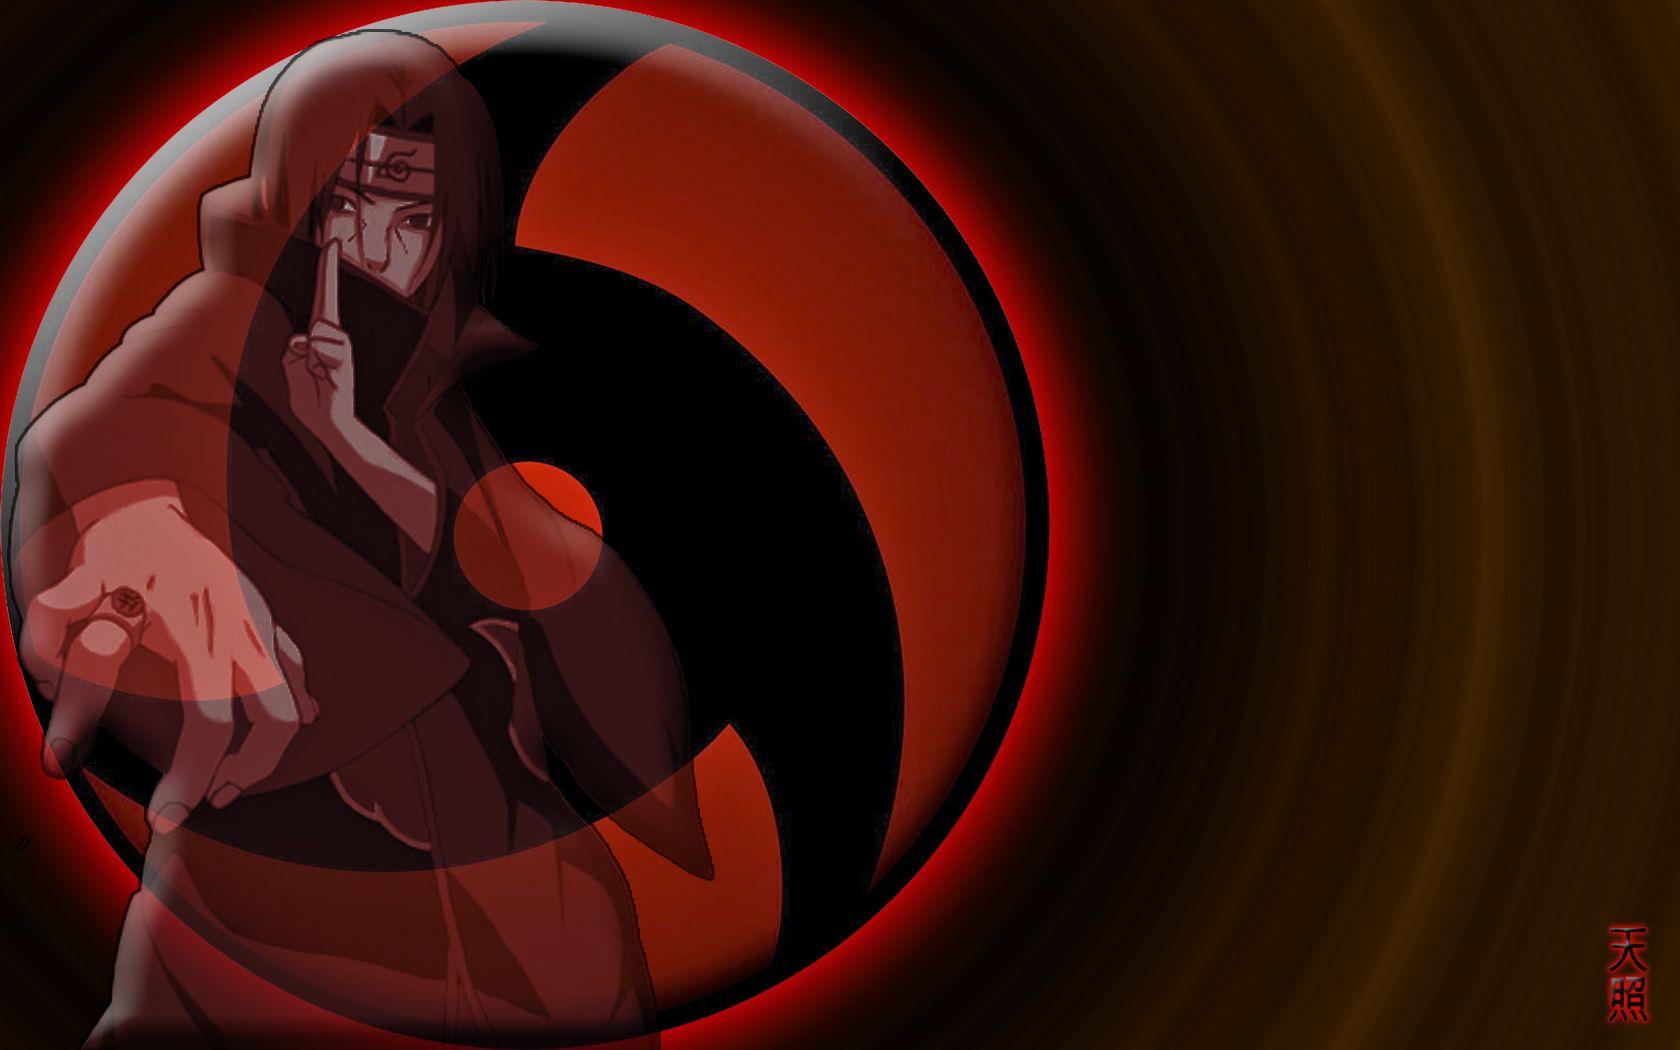 10 Badass Itachi Uchiha Wallpapers for iPhone And Android - Page 4 of 5 -  The RamenSwag